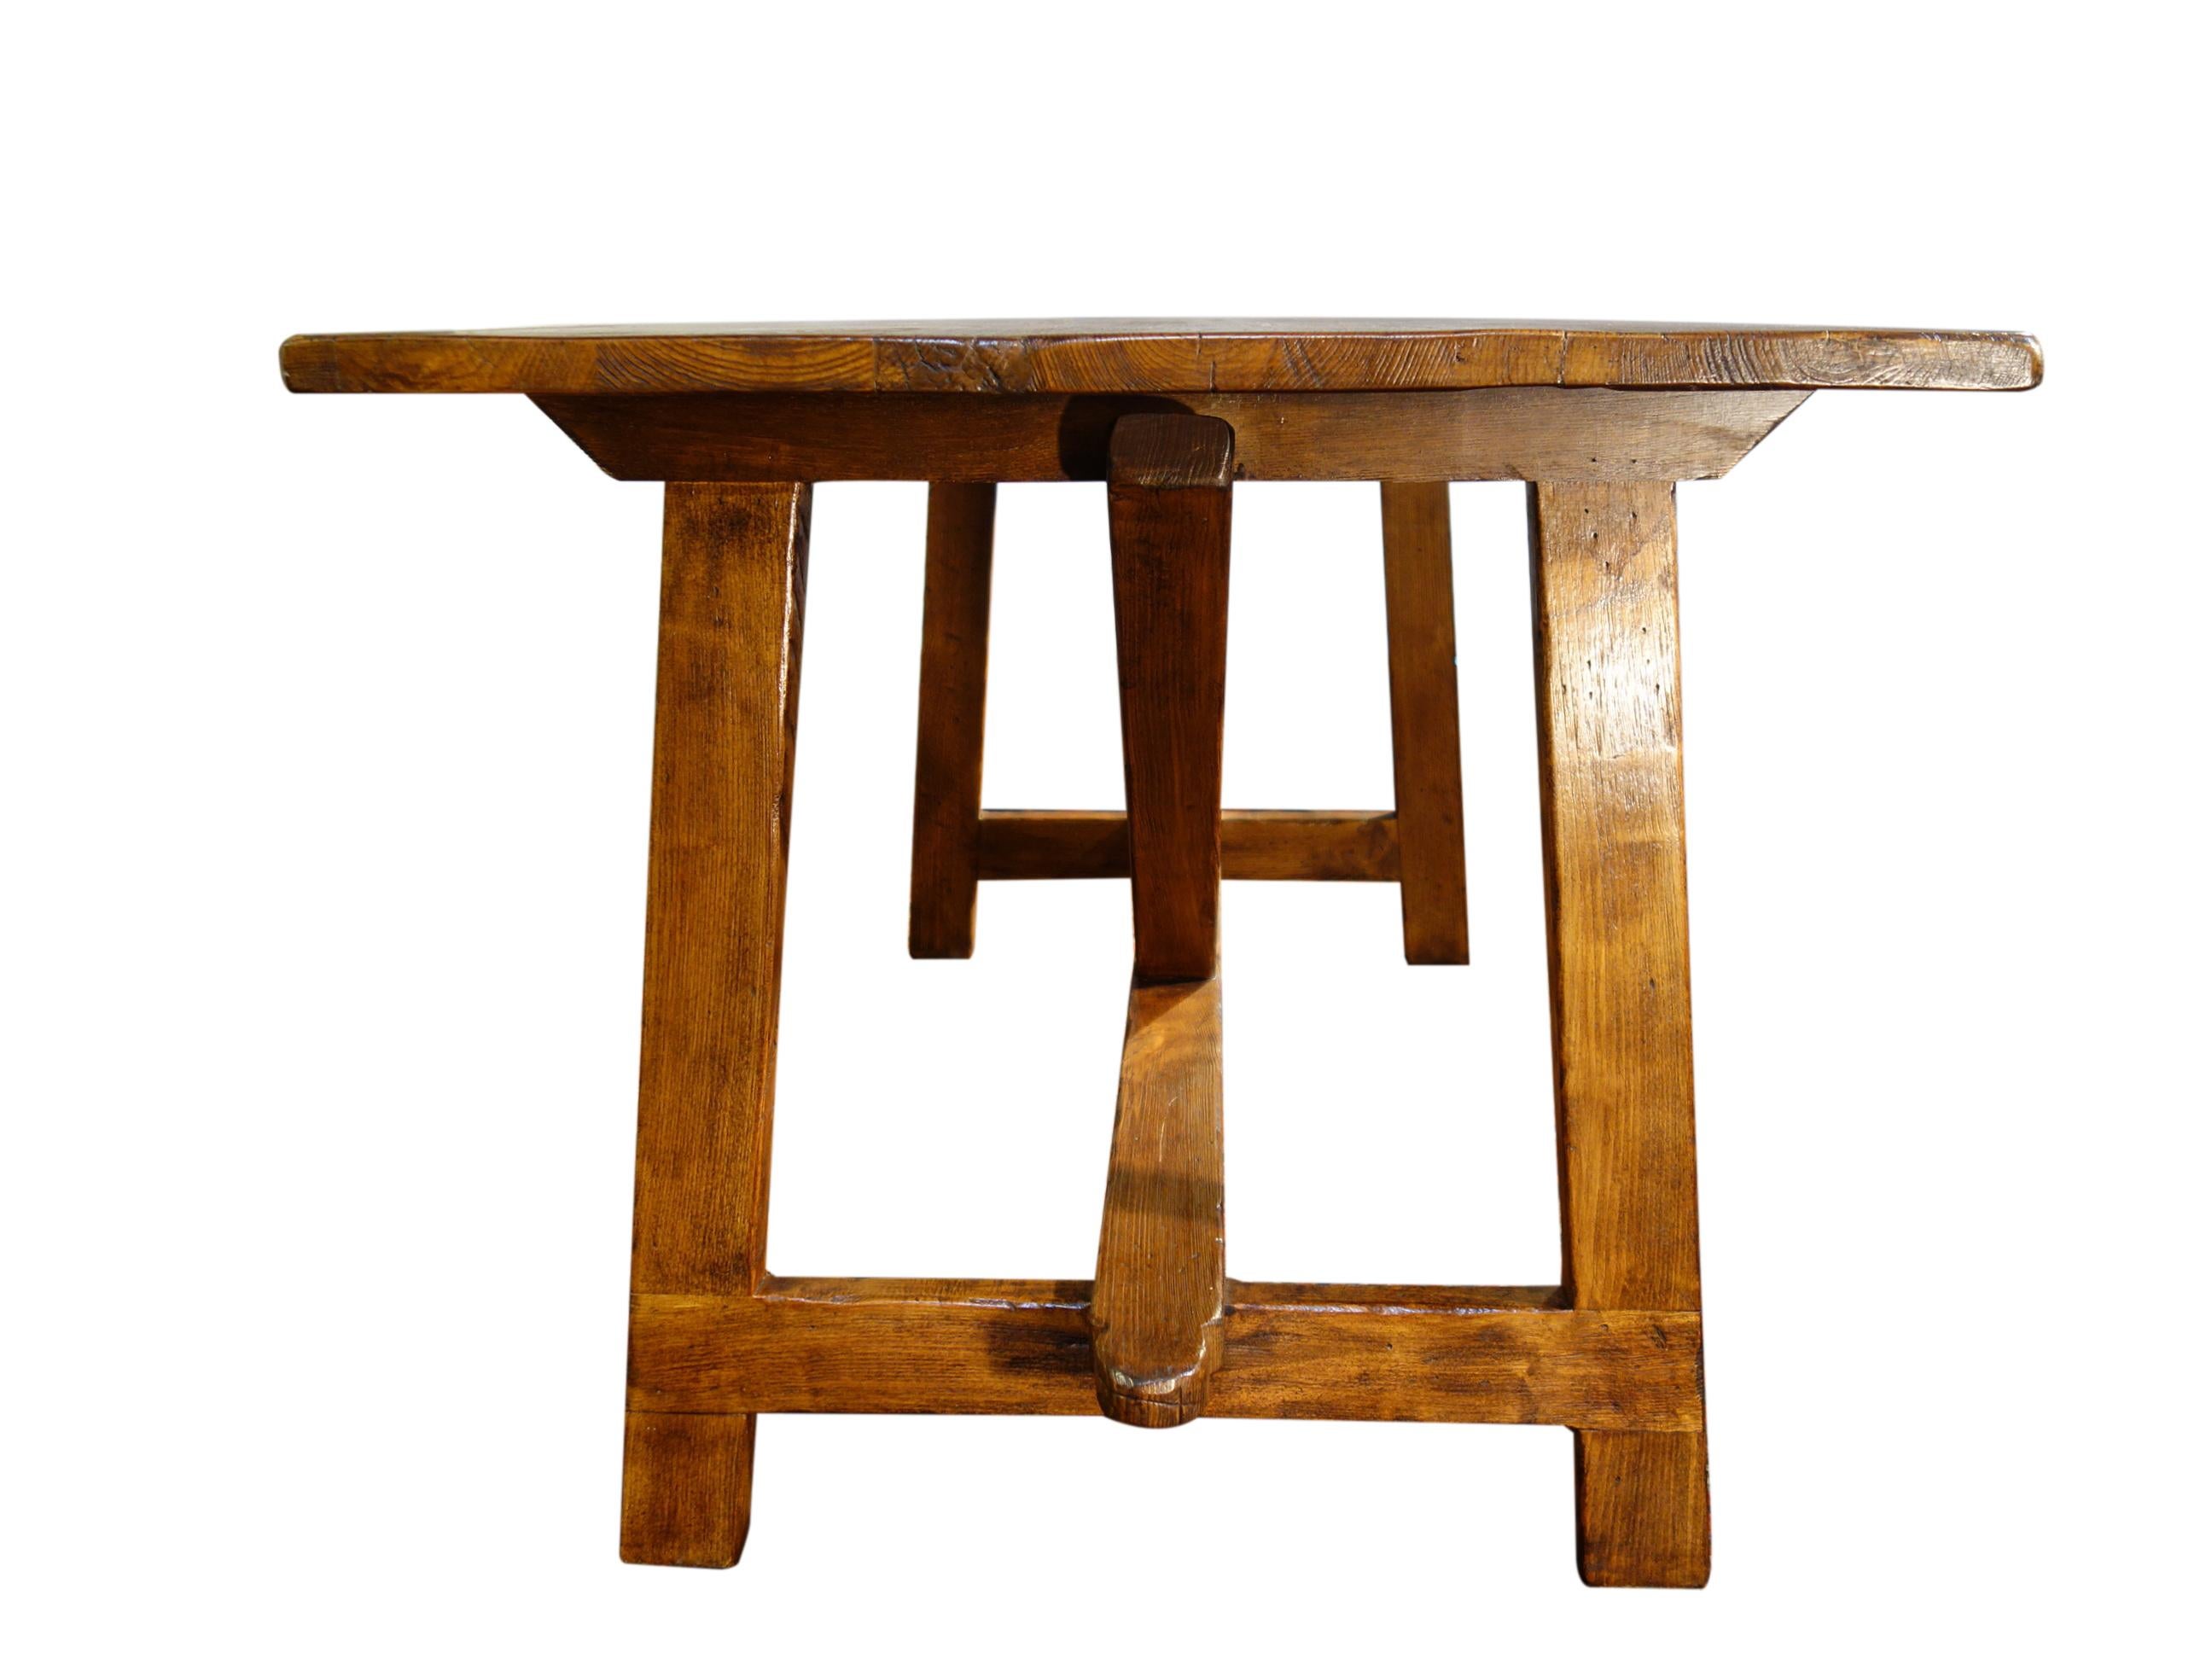 17th C Italian Refectory Style Solid Chestnut CAPRETTA Table with dining options For Sale 2